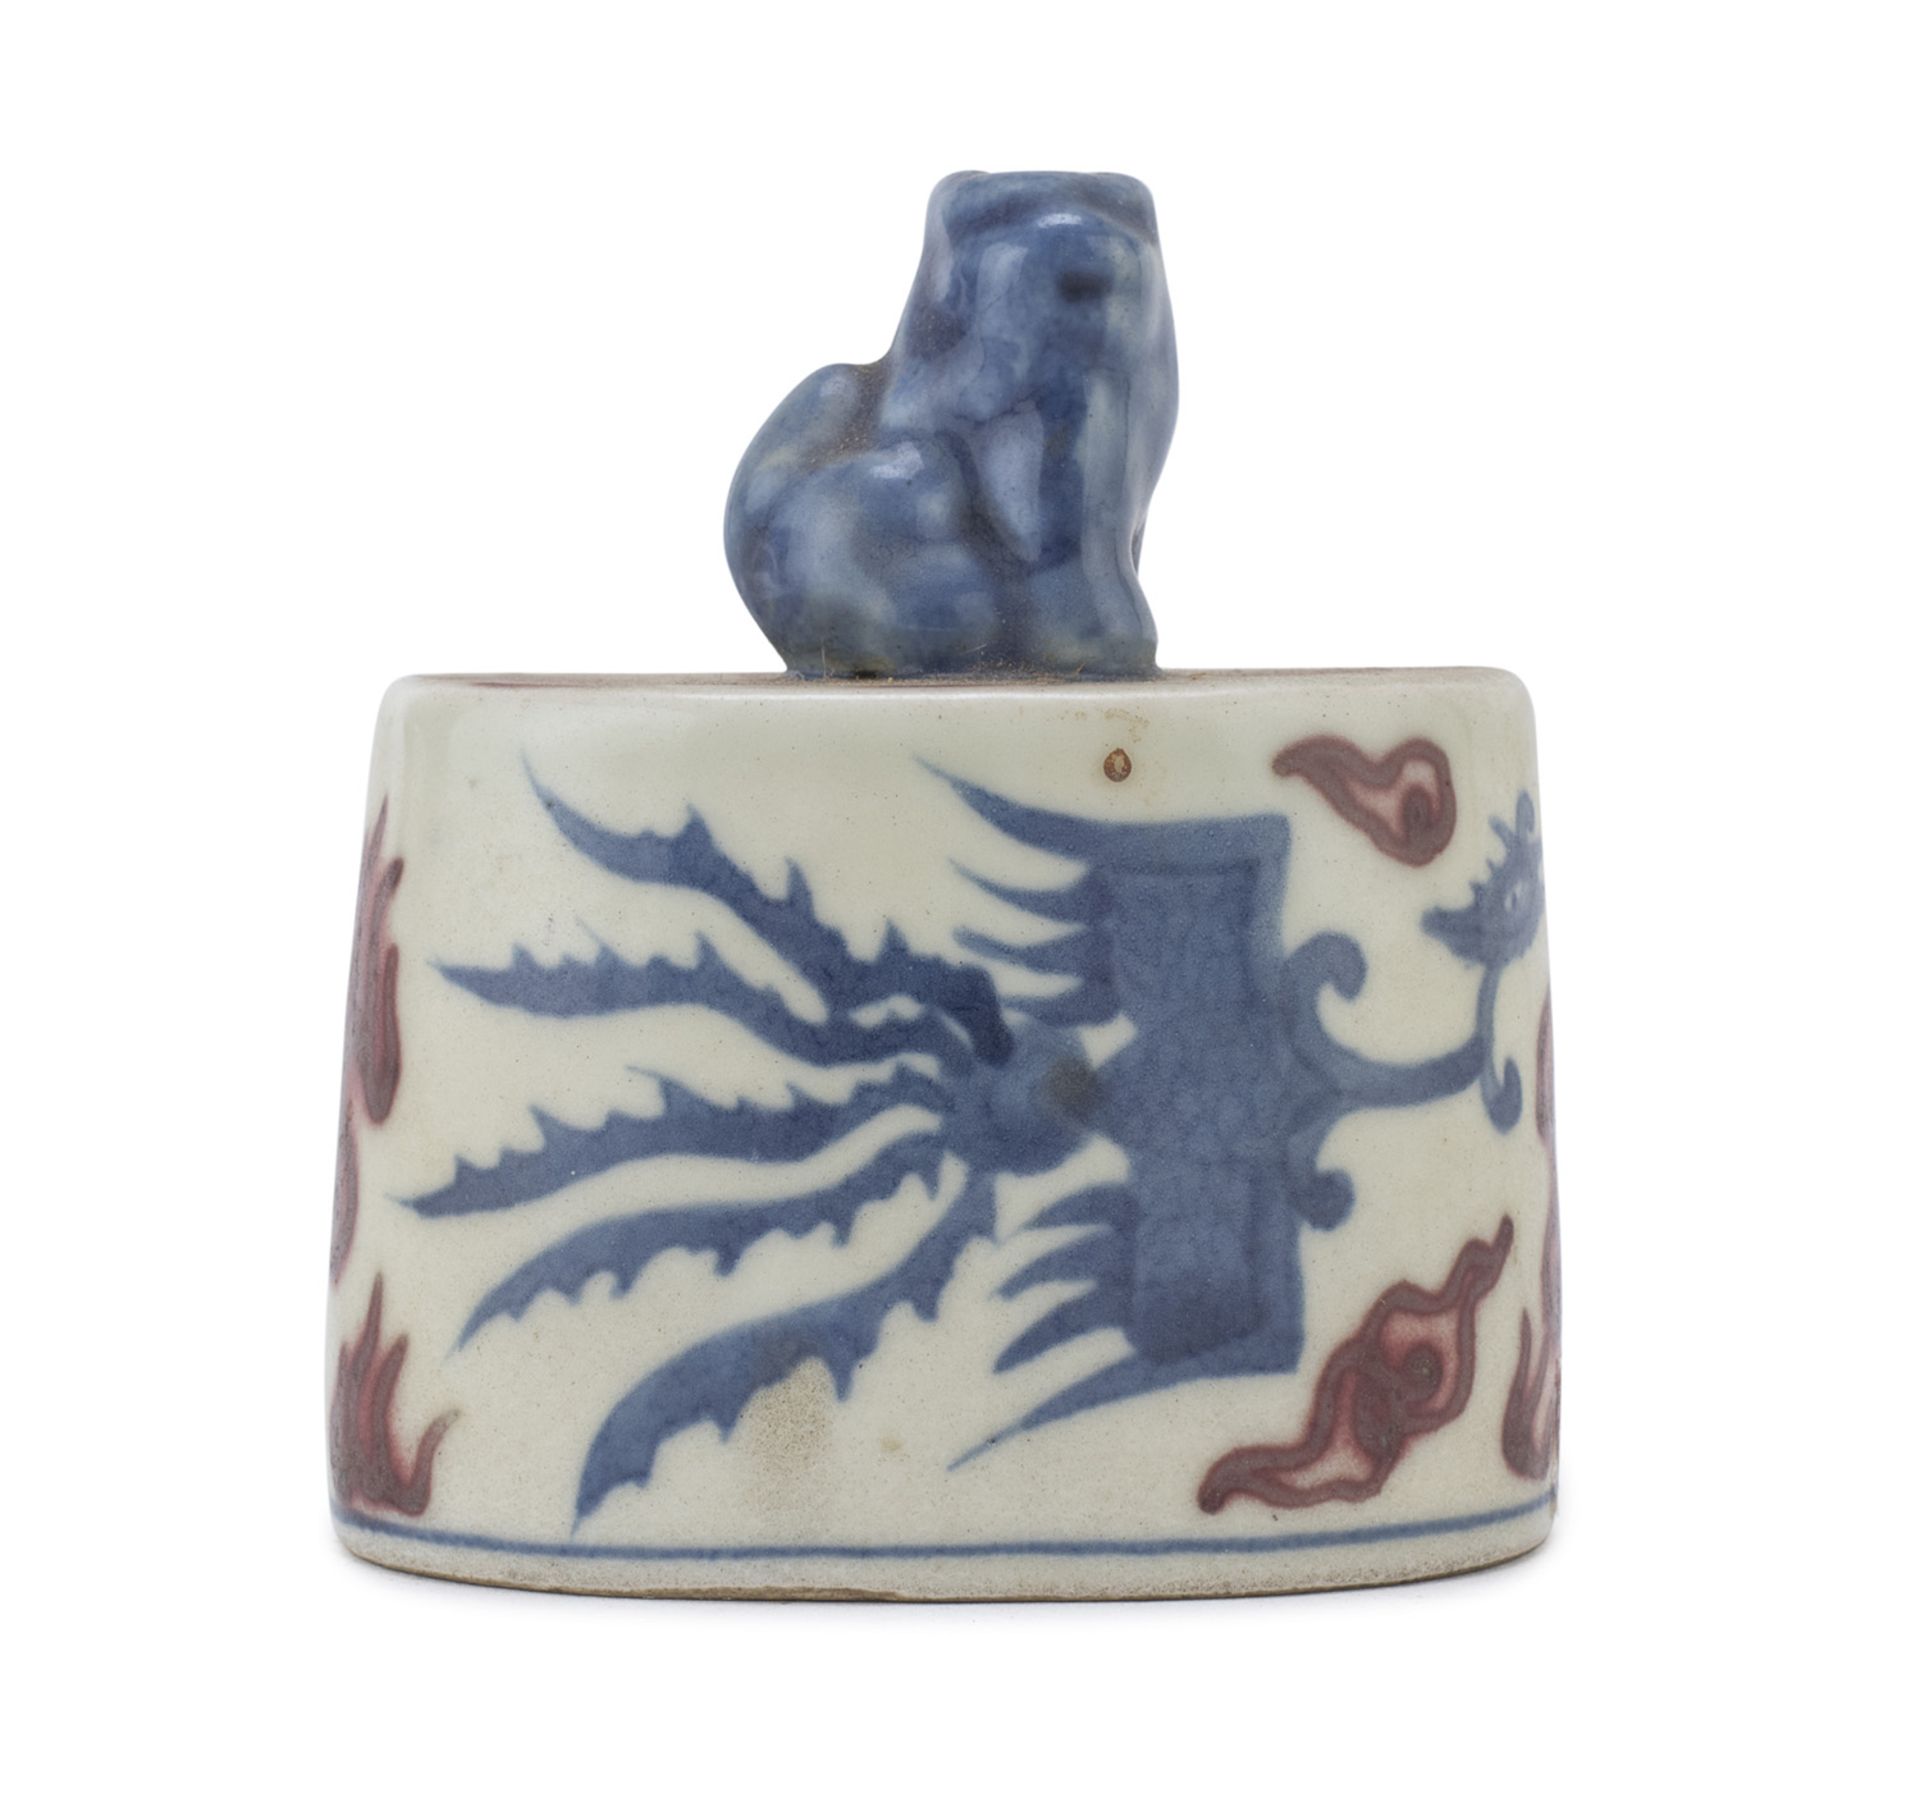 A CHINESE WHITE AND BLUE PORCELAIN SEAL 20TH CENTURY.